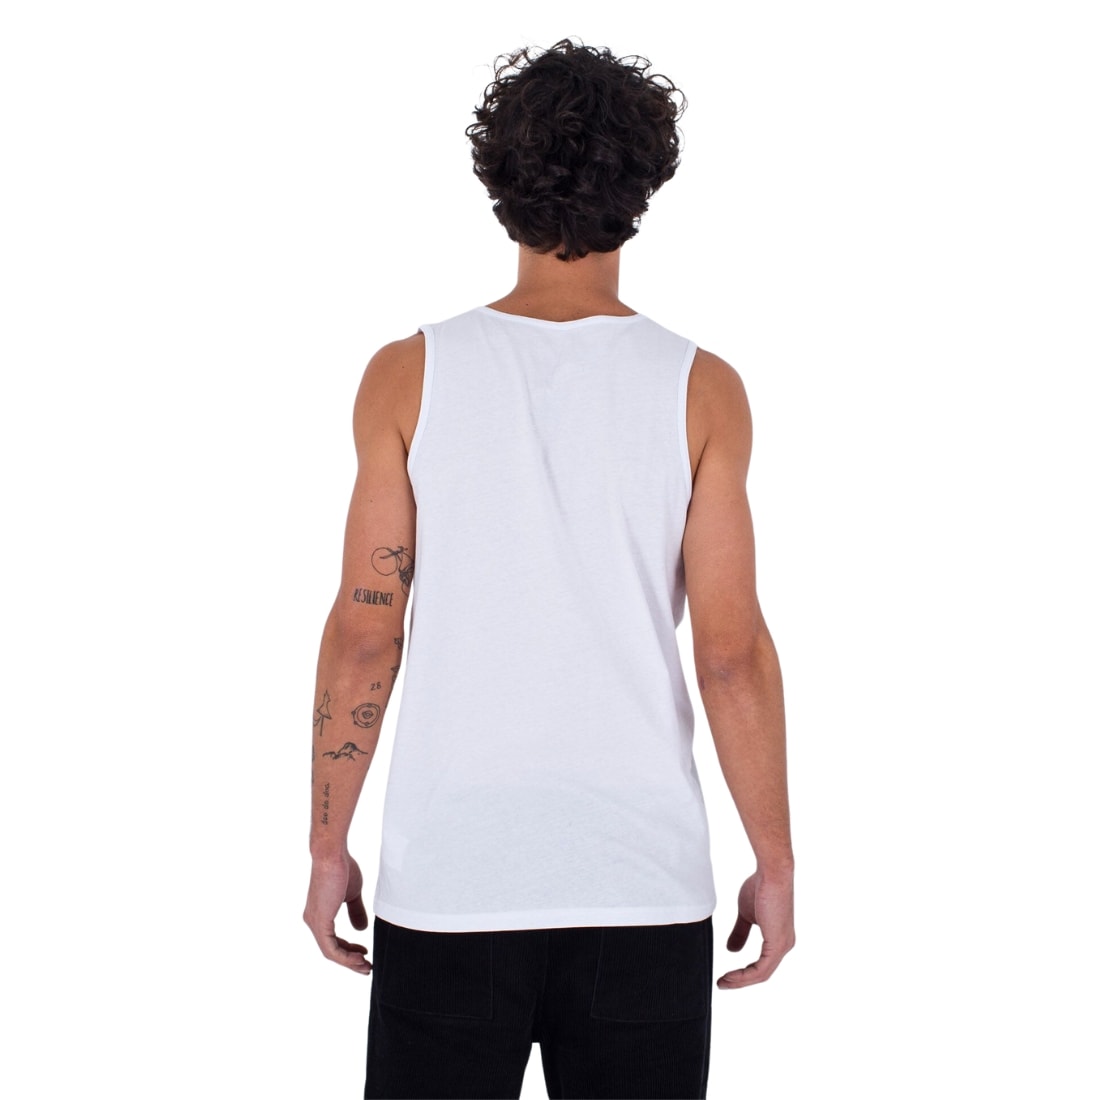 Hurley Everyday One &amp; Only Solid Tank Top Vest - White - Mens Surf Brand Vest/Tank Top by Hurley